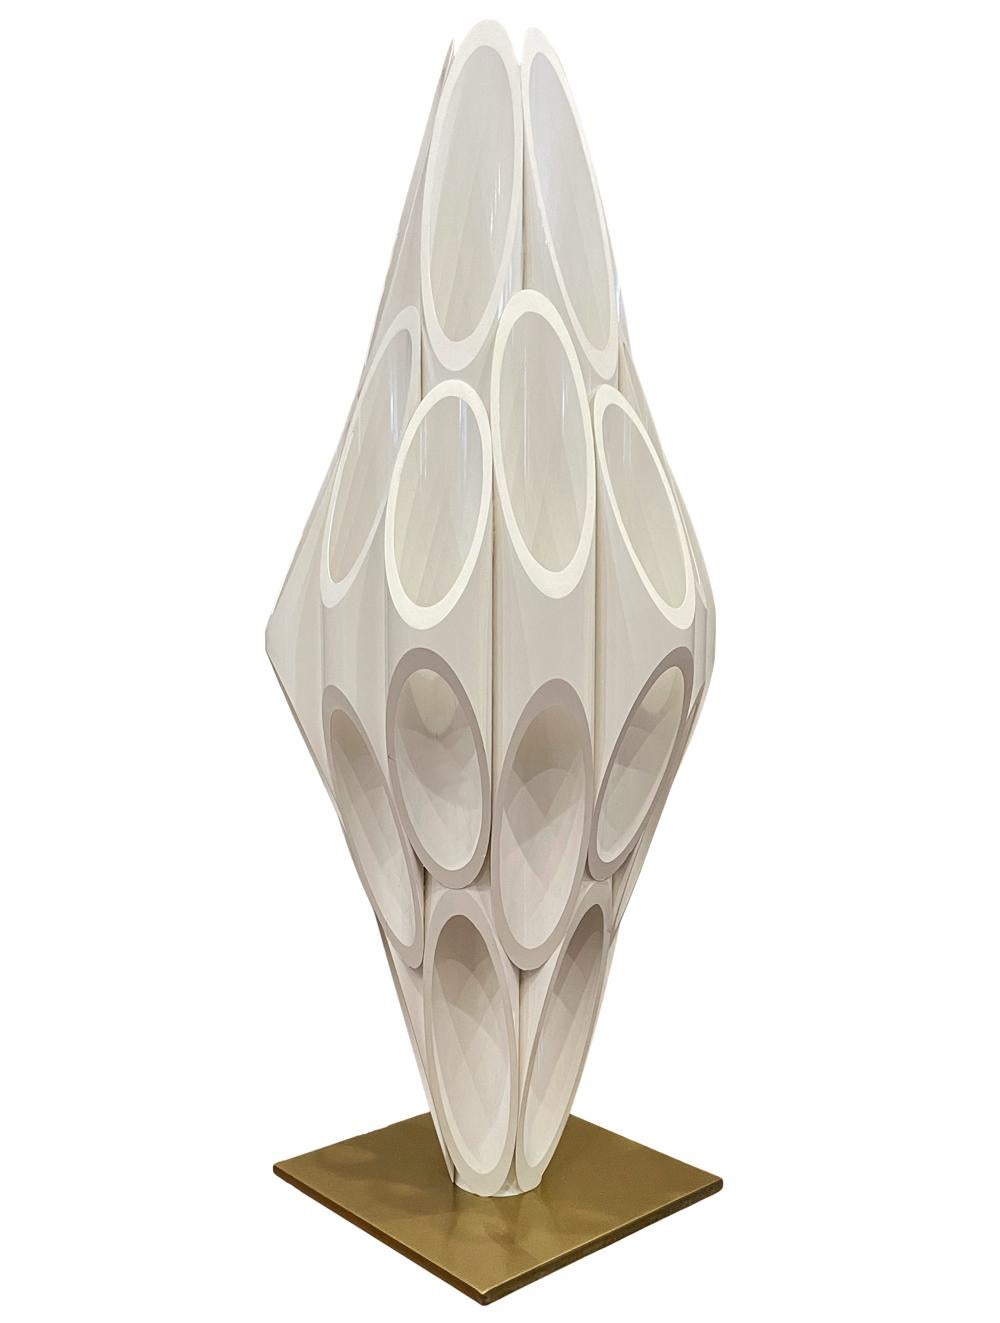 Contemporary Mid-Century Modern Space Age Modern Tubular Table Lamp After Rougier & Panton For Sale